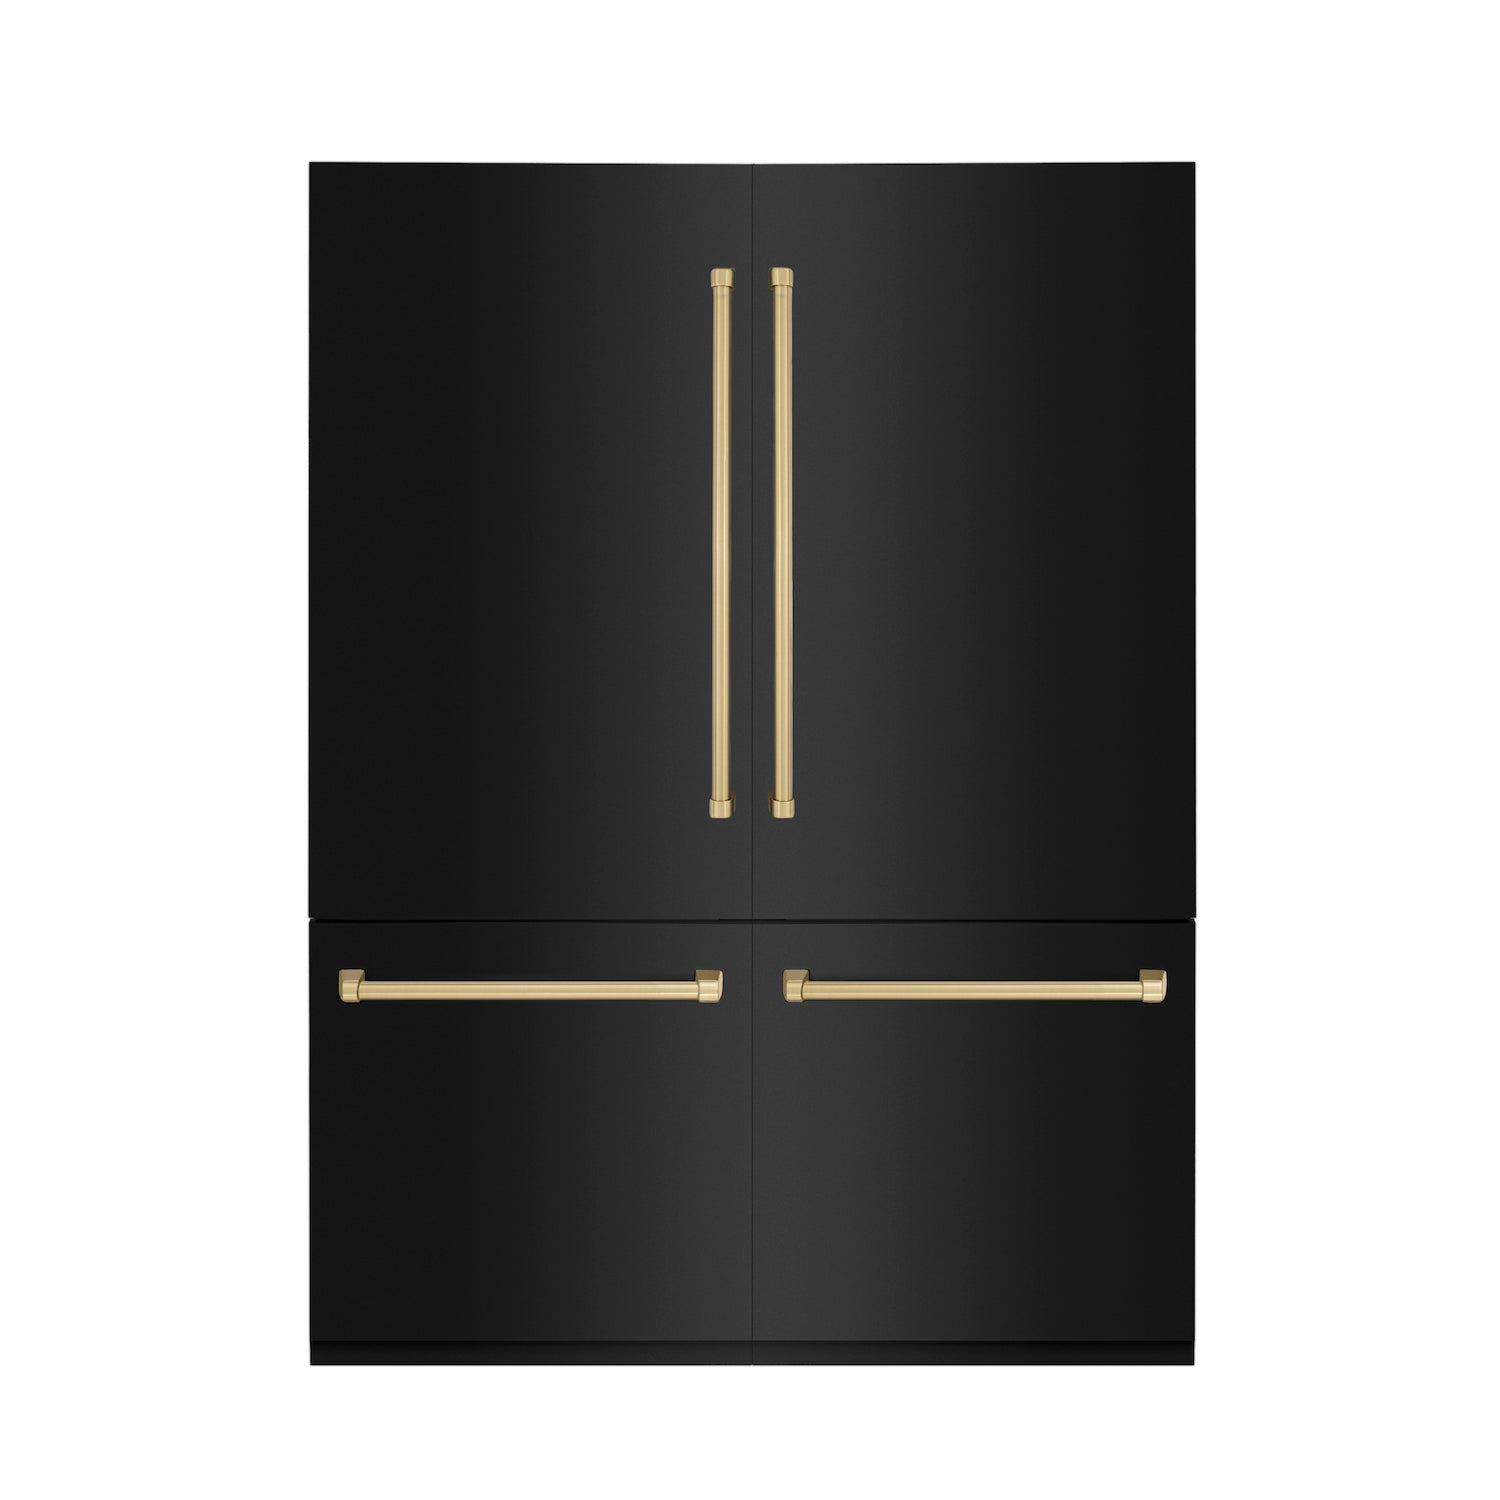 ZLINE Autograph Edition 60 in. 32.2 cu. ft. Built-in 4-Door French Door Refrigerator with Internal Water and Ice Dispenser in Black Stainless Steel with Champagne Bronze Accents (RBIVZ-BS-60-CB) front, closed.